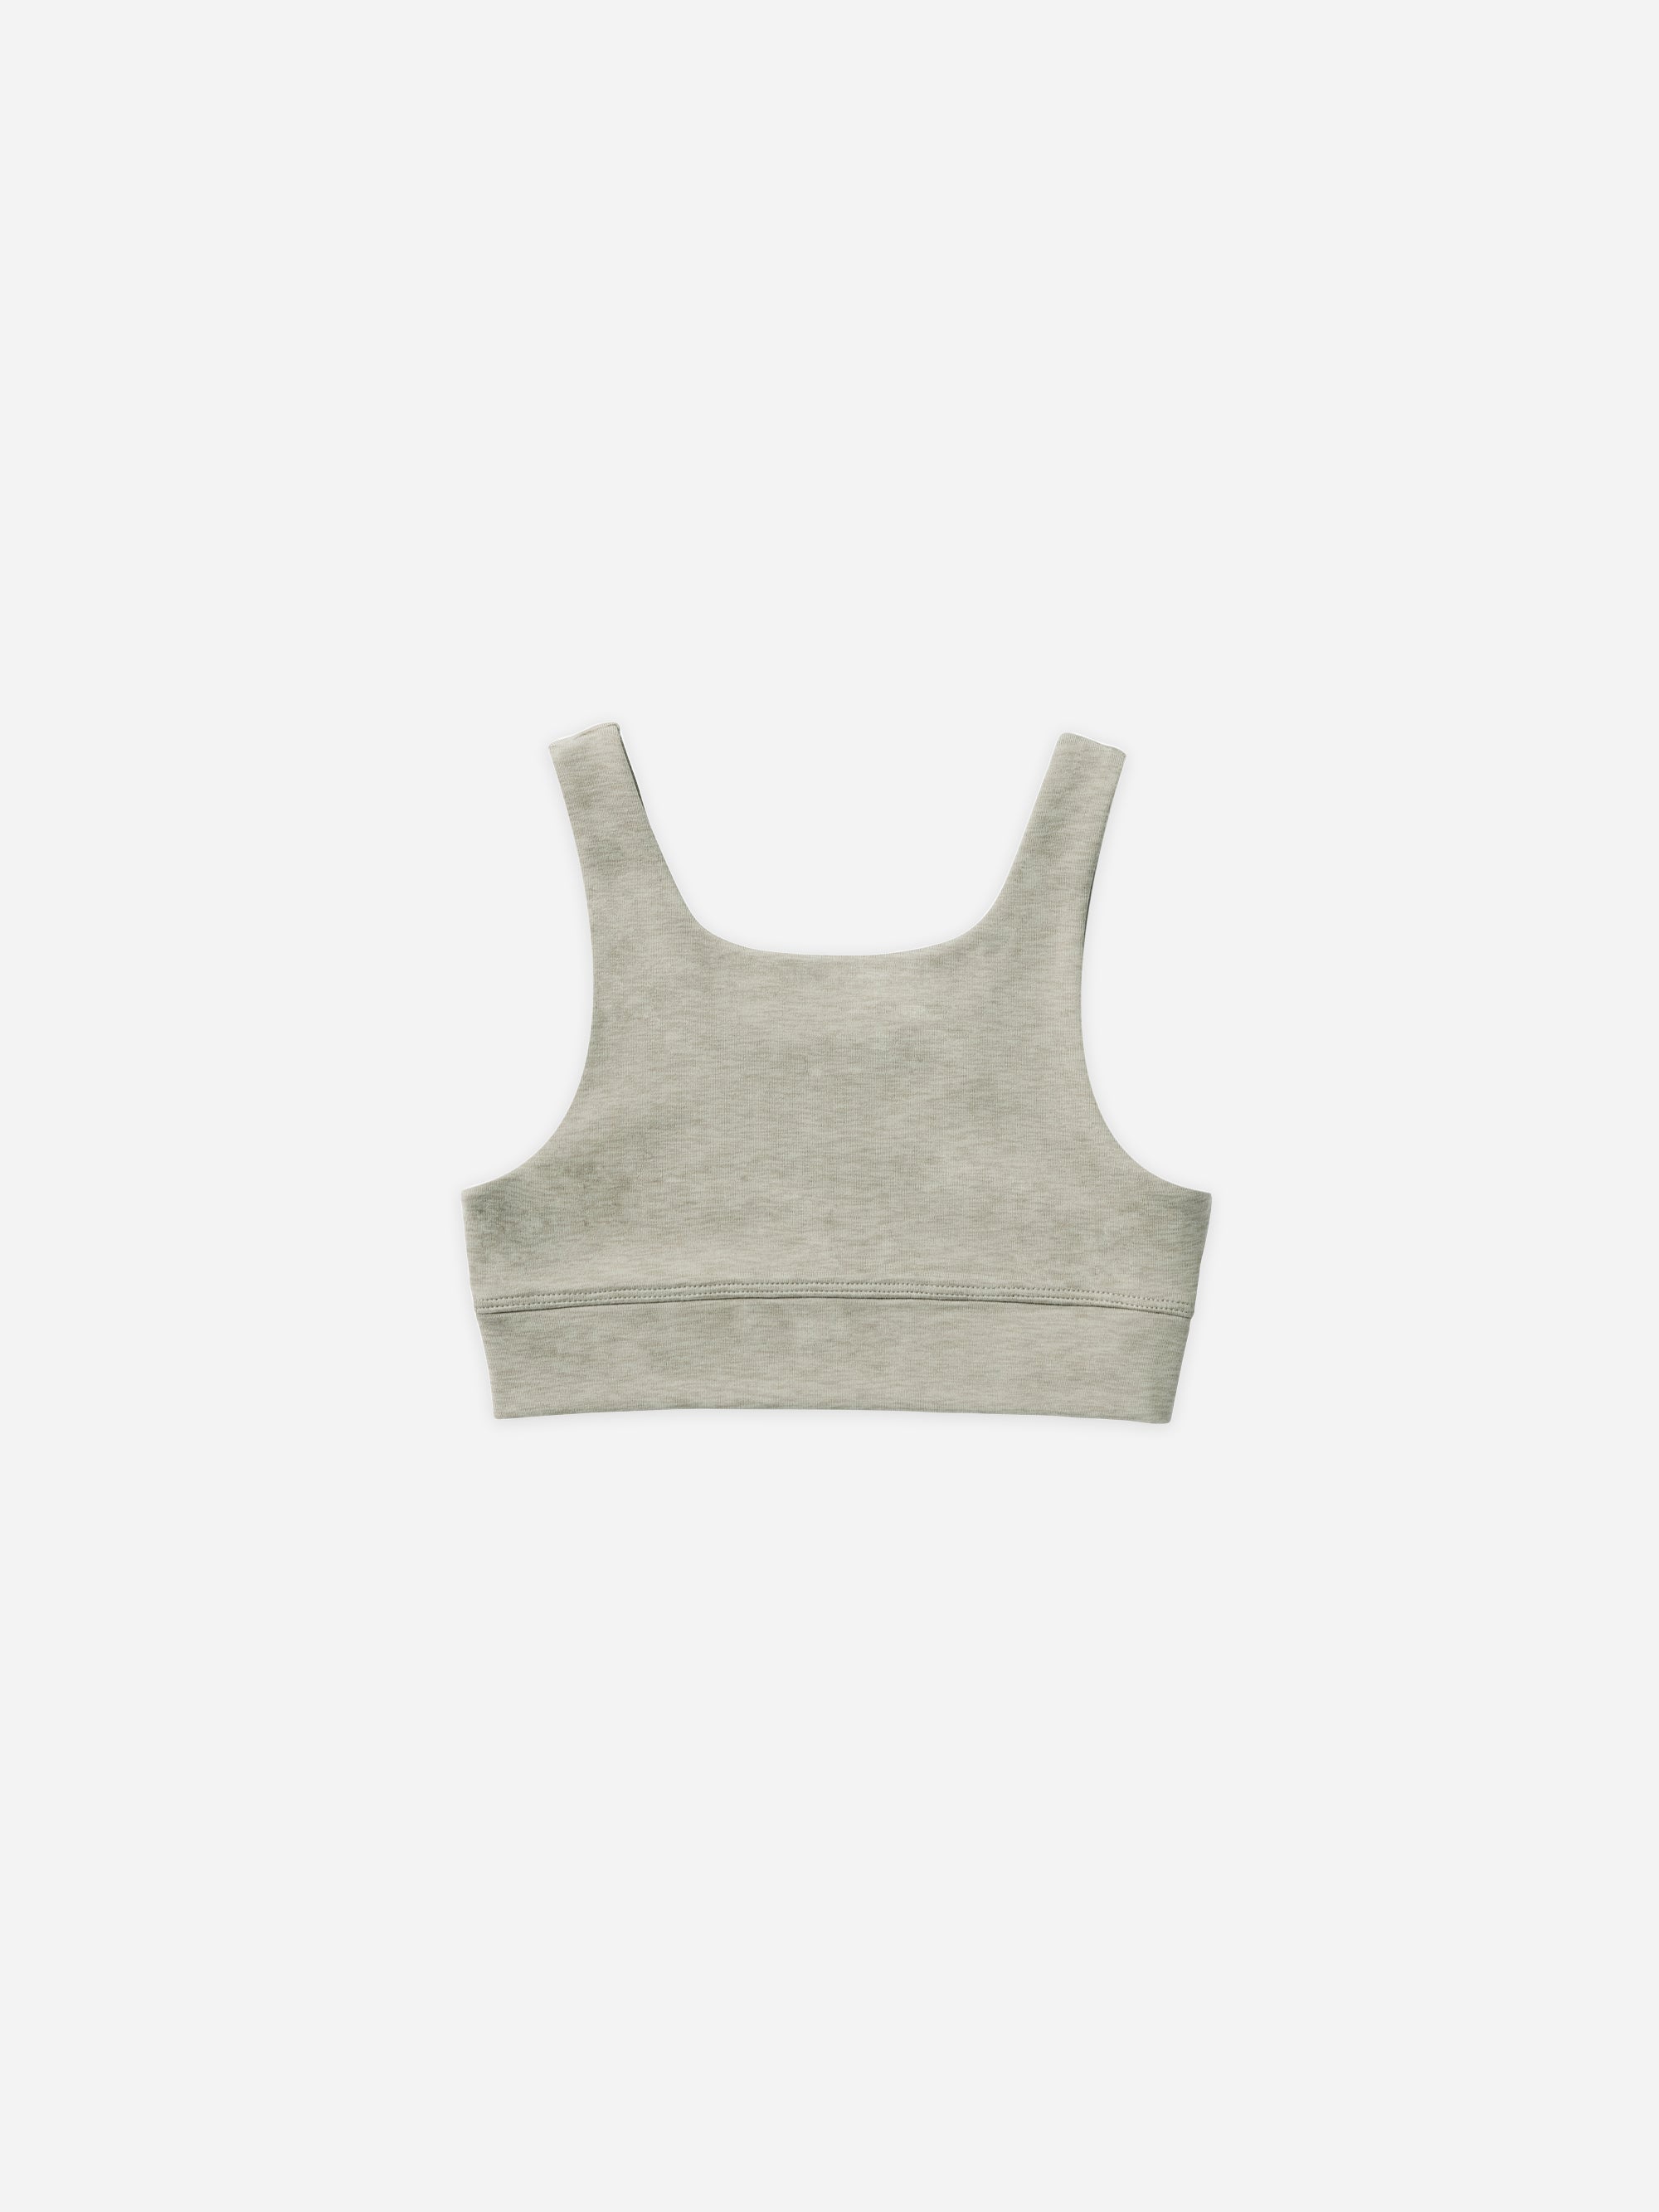 Swift Sports Bra || Heathered Sage - Rylee + Cru | Kids Clothes | Trendy Baby Clothes | Modern Infant Outfits |